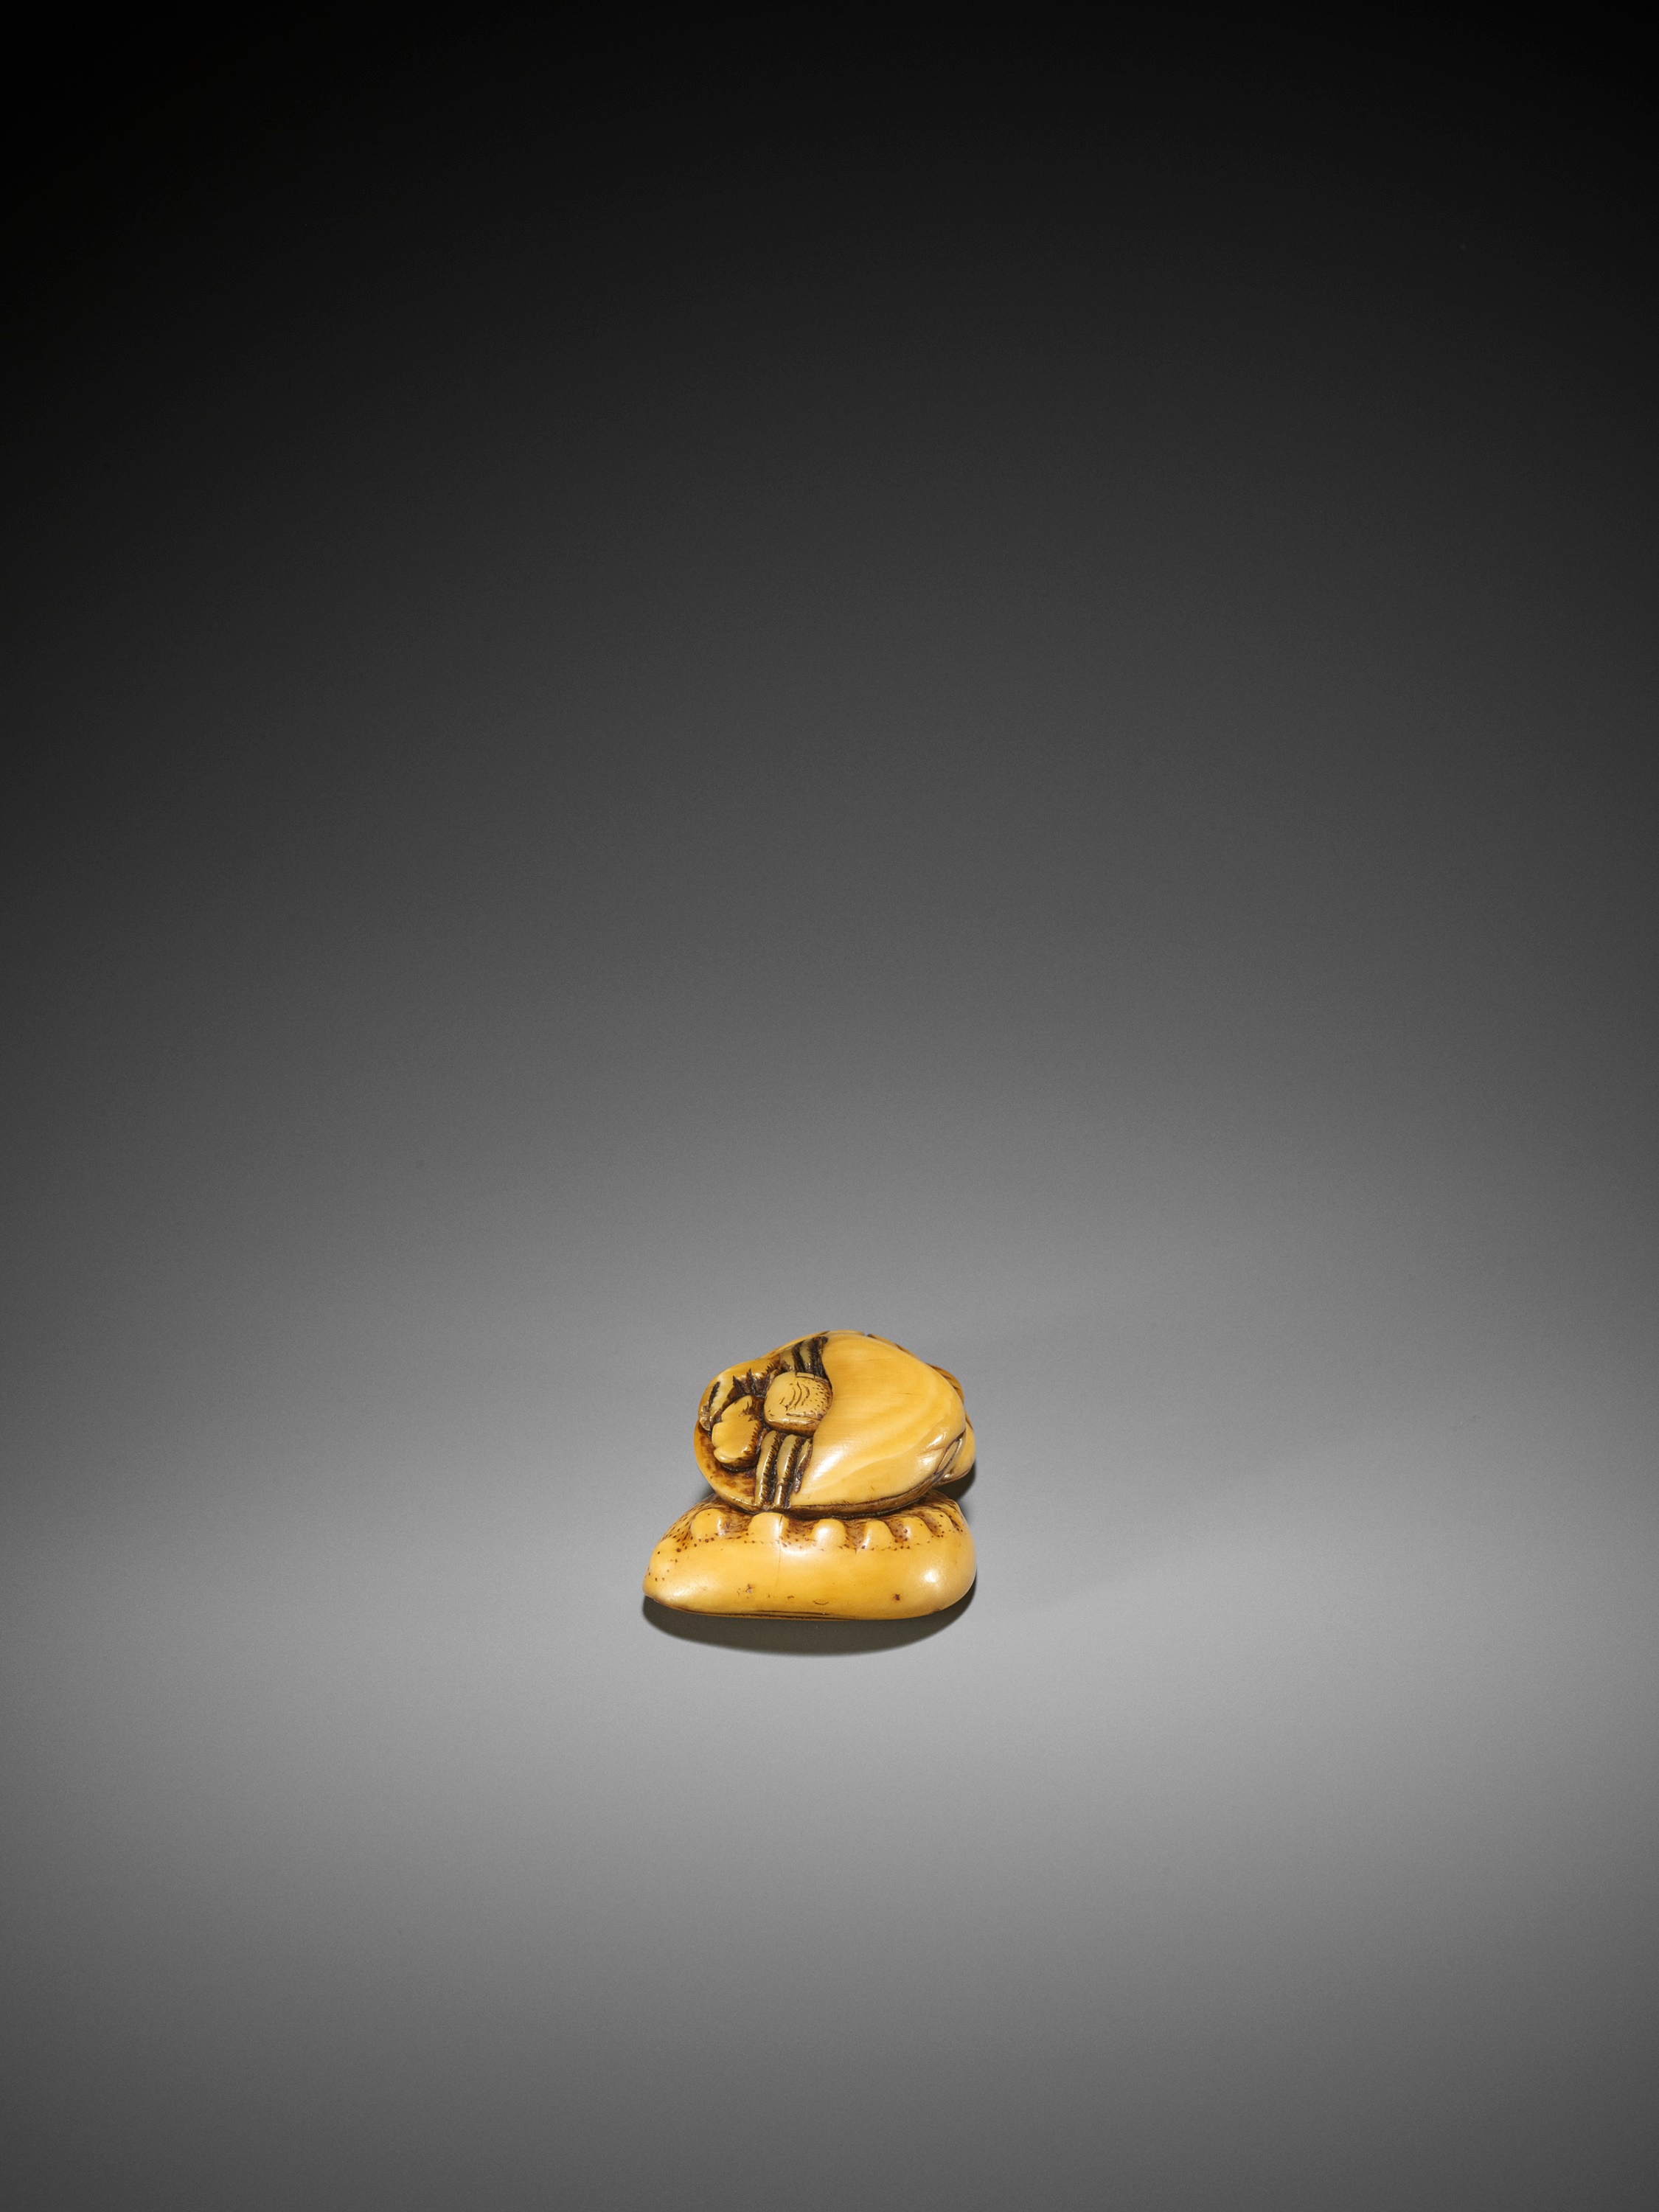 AN EARLY IVORY NETSUKE OF A HERMIT CRAB AND SHELLS - Image 4 of 8